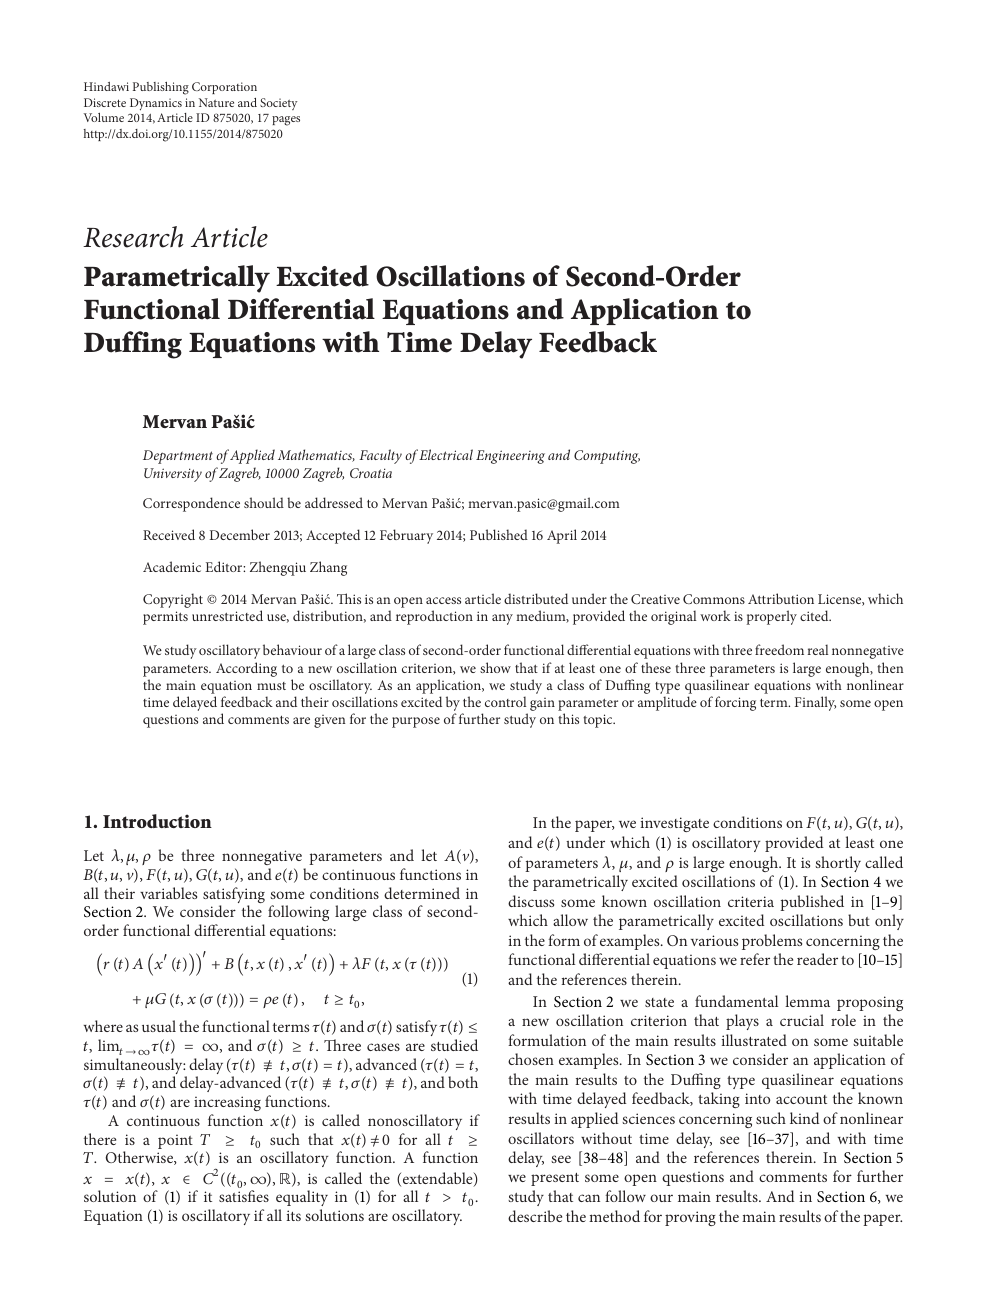 Parametrically Excited Oscillations Of Second Order Functional Differential Equations And Application To Duffing Equations With Time Delay Feedback Topic Of Research Paper In Mathematics Download Scholarly Article Pdf And Read For Free